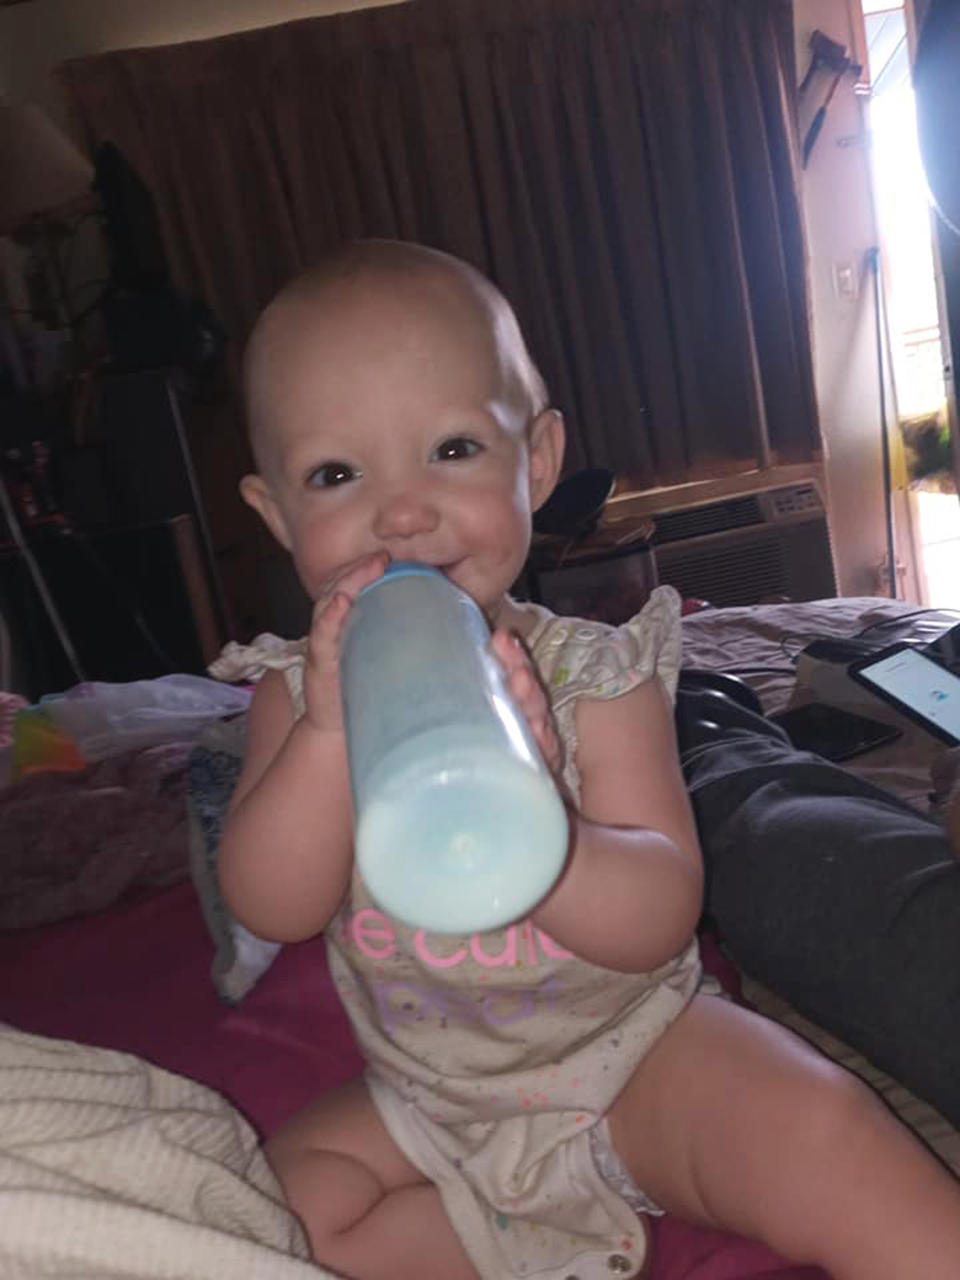 A baby girl (Mercedes) smiling looking at camera with a bottle in her mouth.